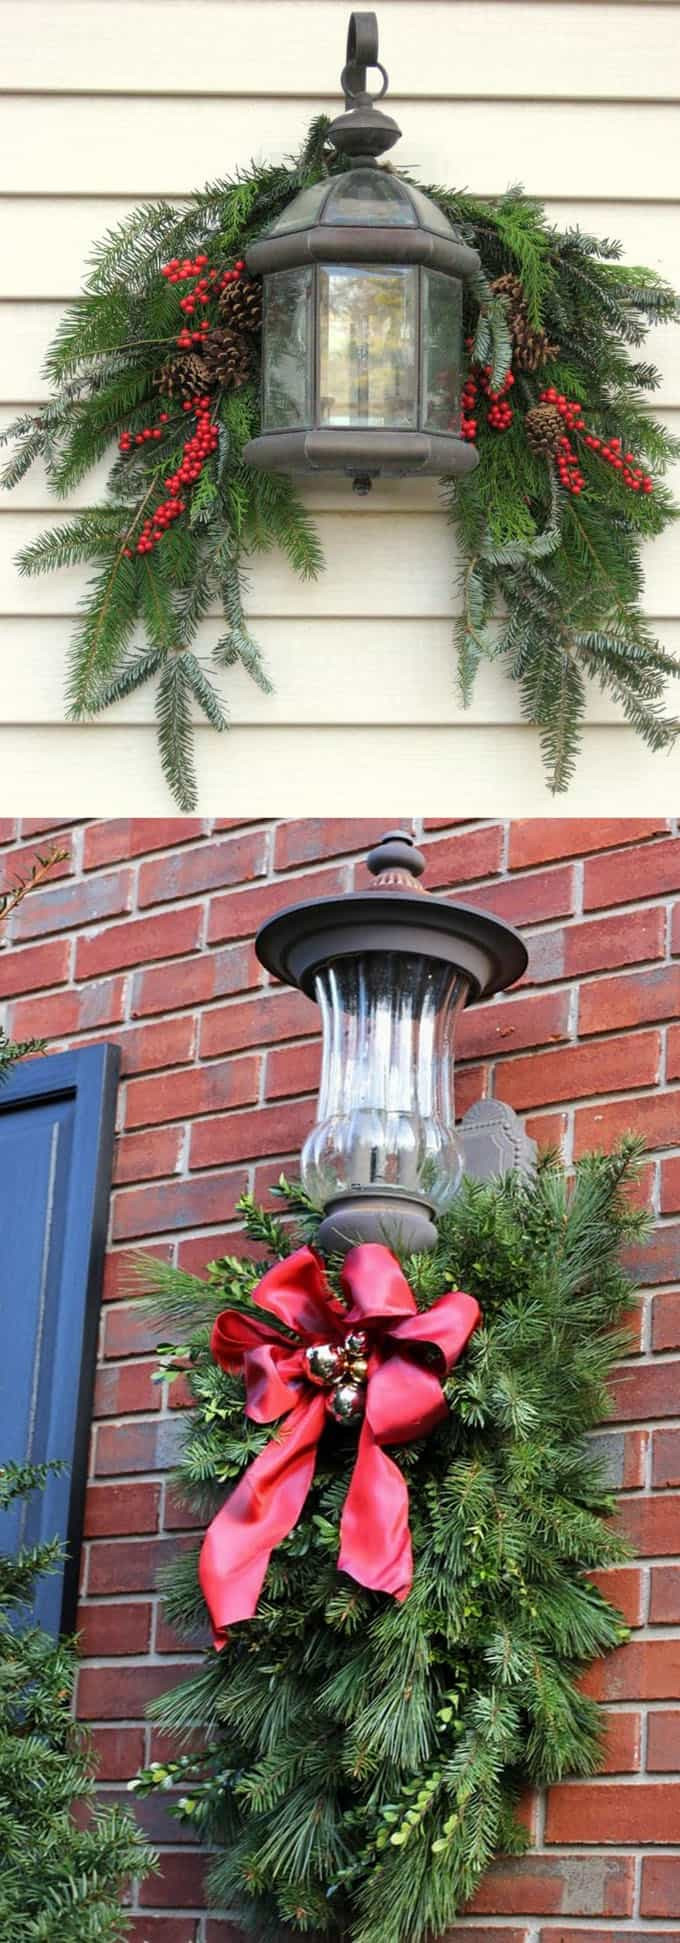 DIY Outdoor Decorating Ideas
 Gorgeous Outdoor Christmas Decorations 32 Best Ideas